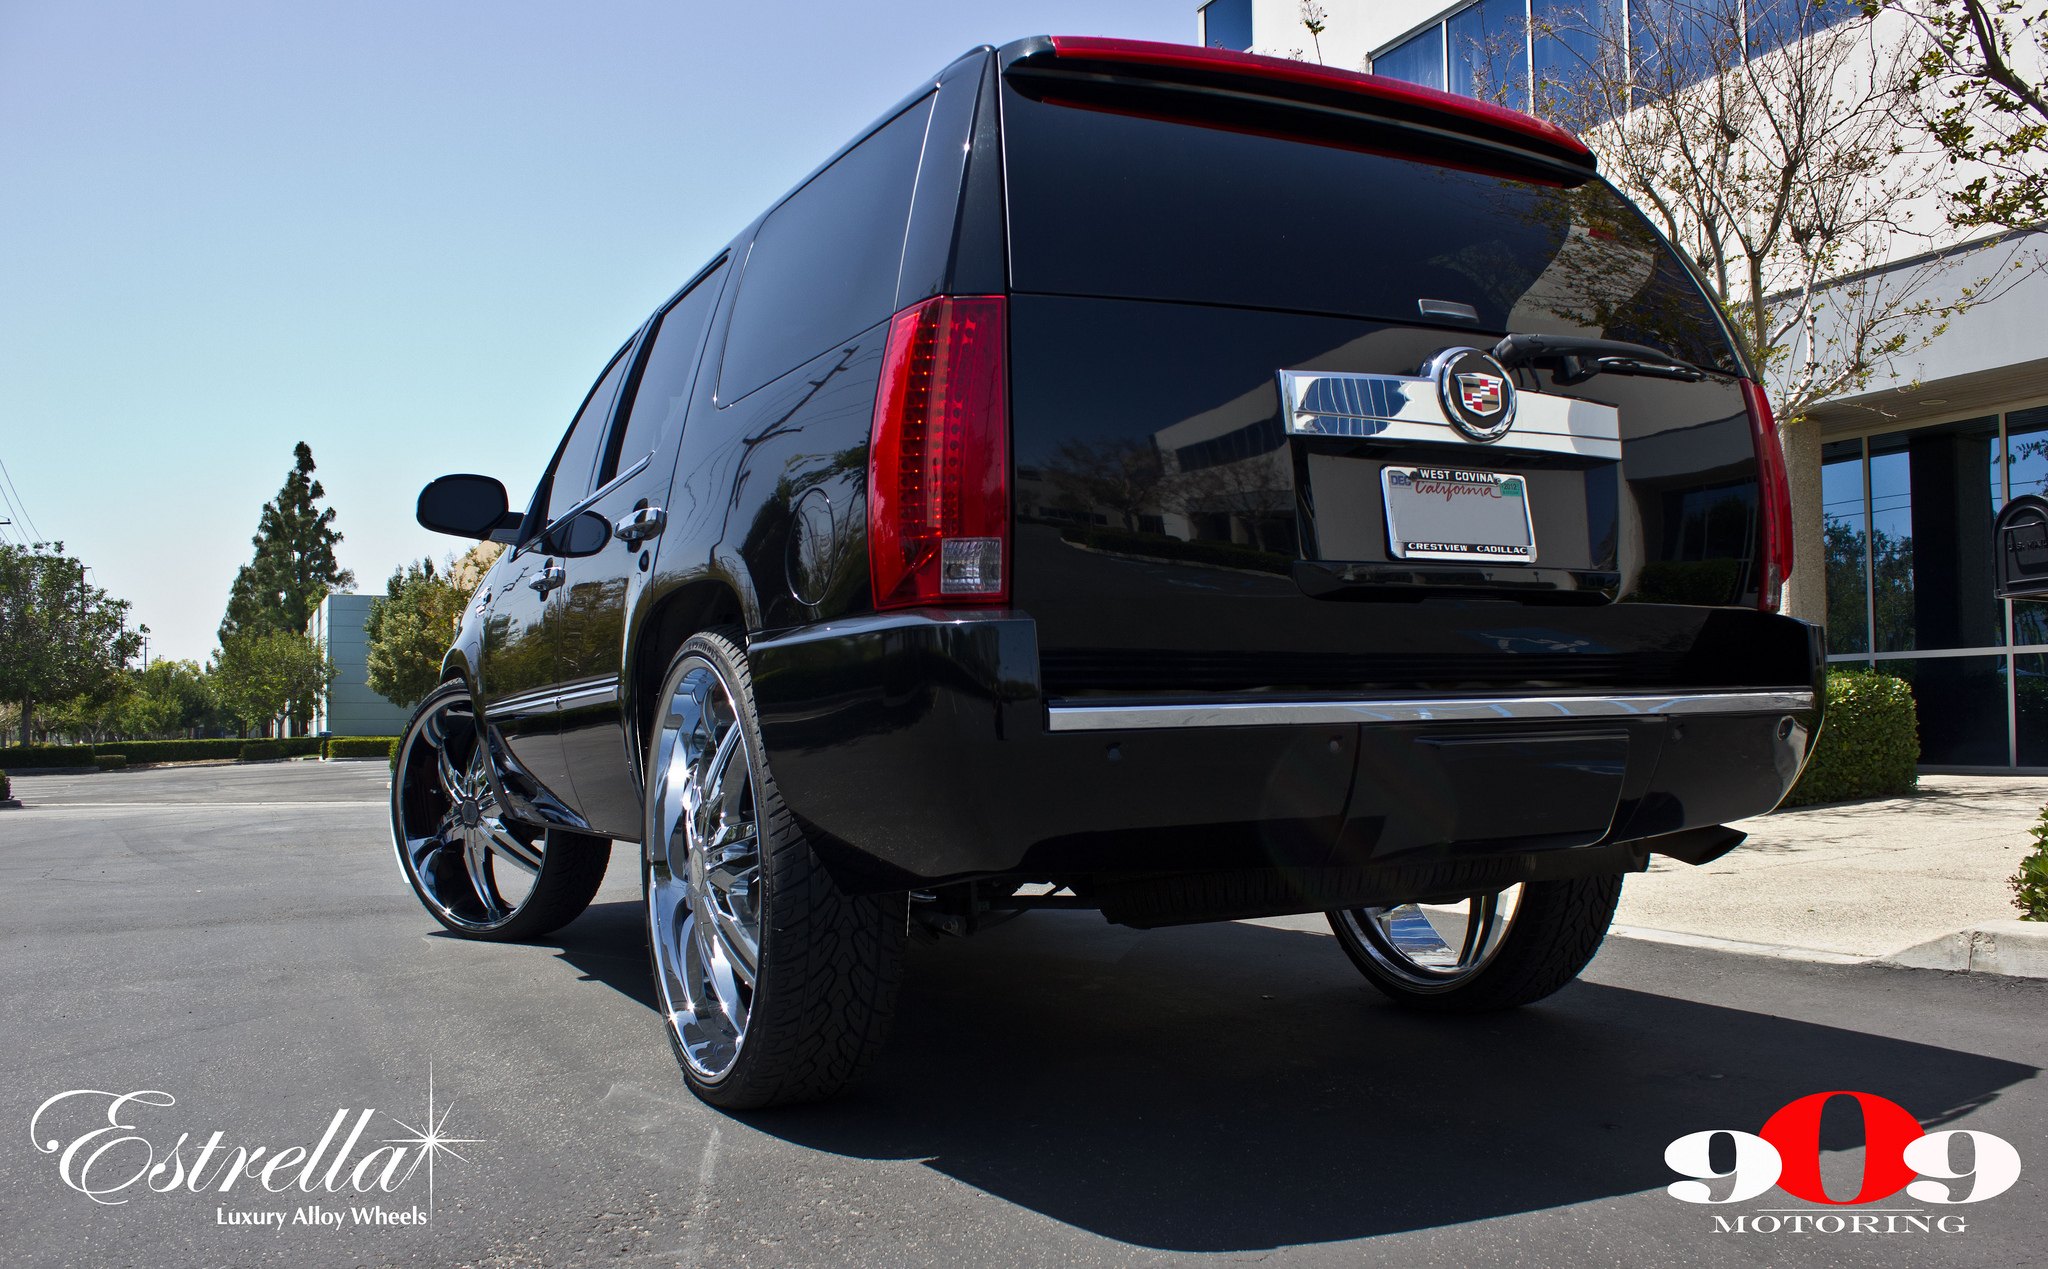 Roofline Spoiler with Light on Black Cadillac Escalade - Photo by Rennen International